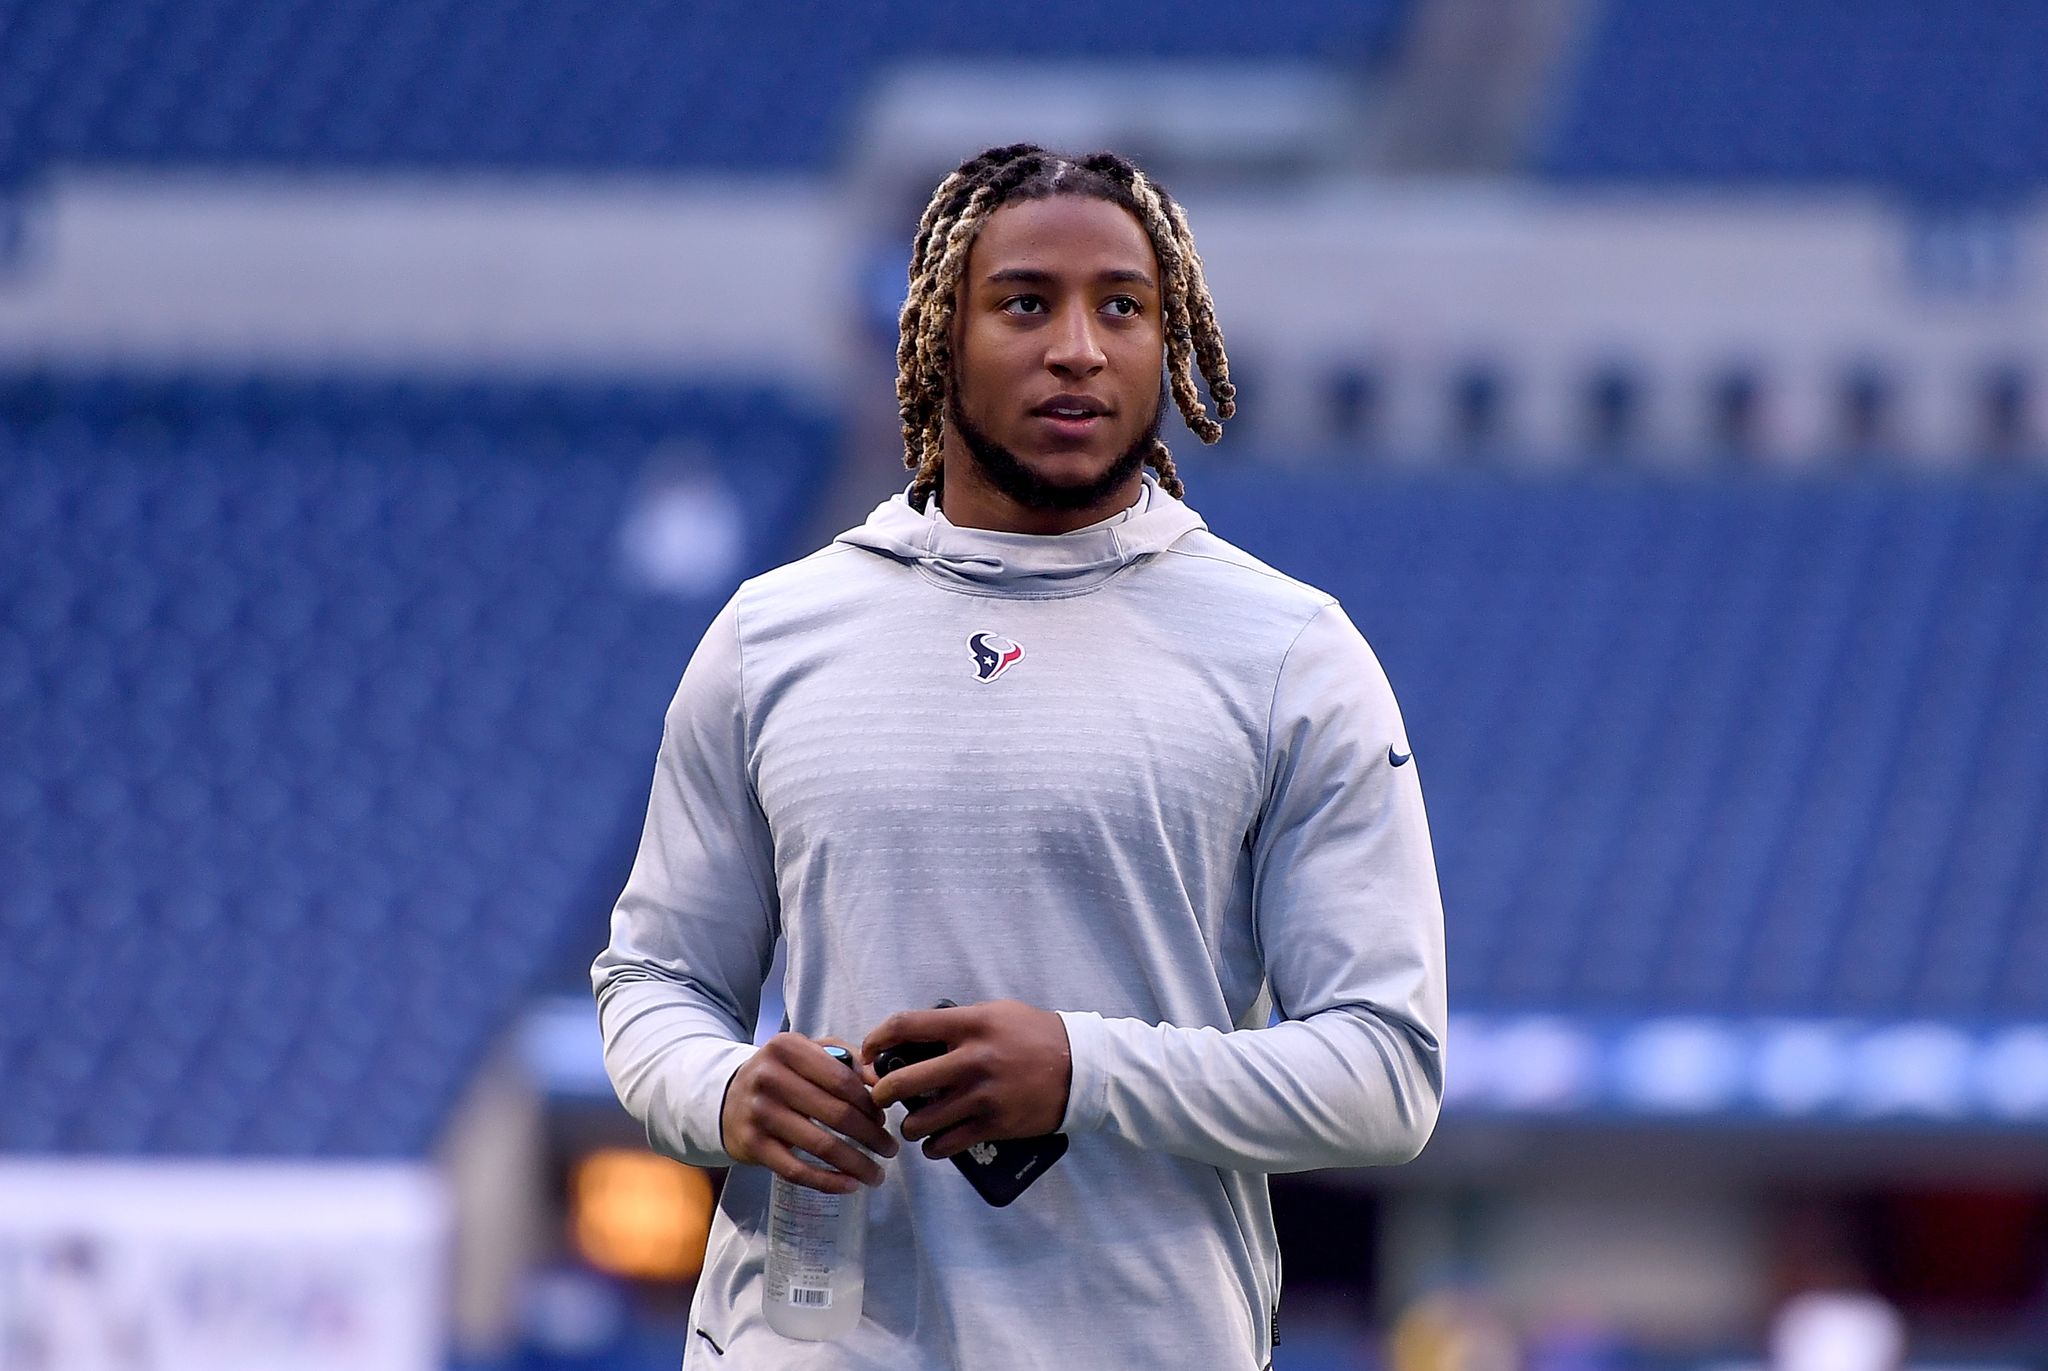 Will Fuller warms up at Lucas Oil Stadium in October 2019 in Indianapolis | Source: Getty Images